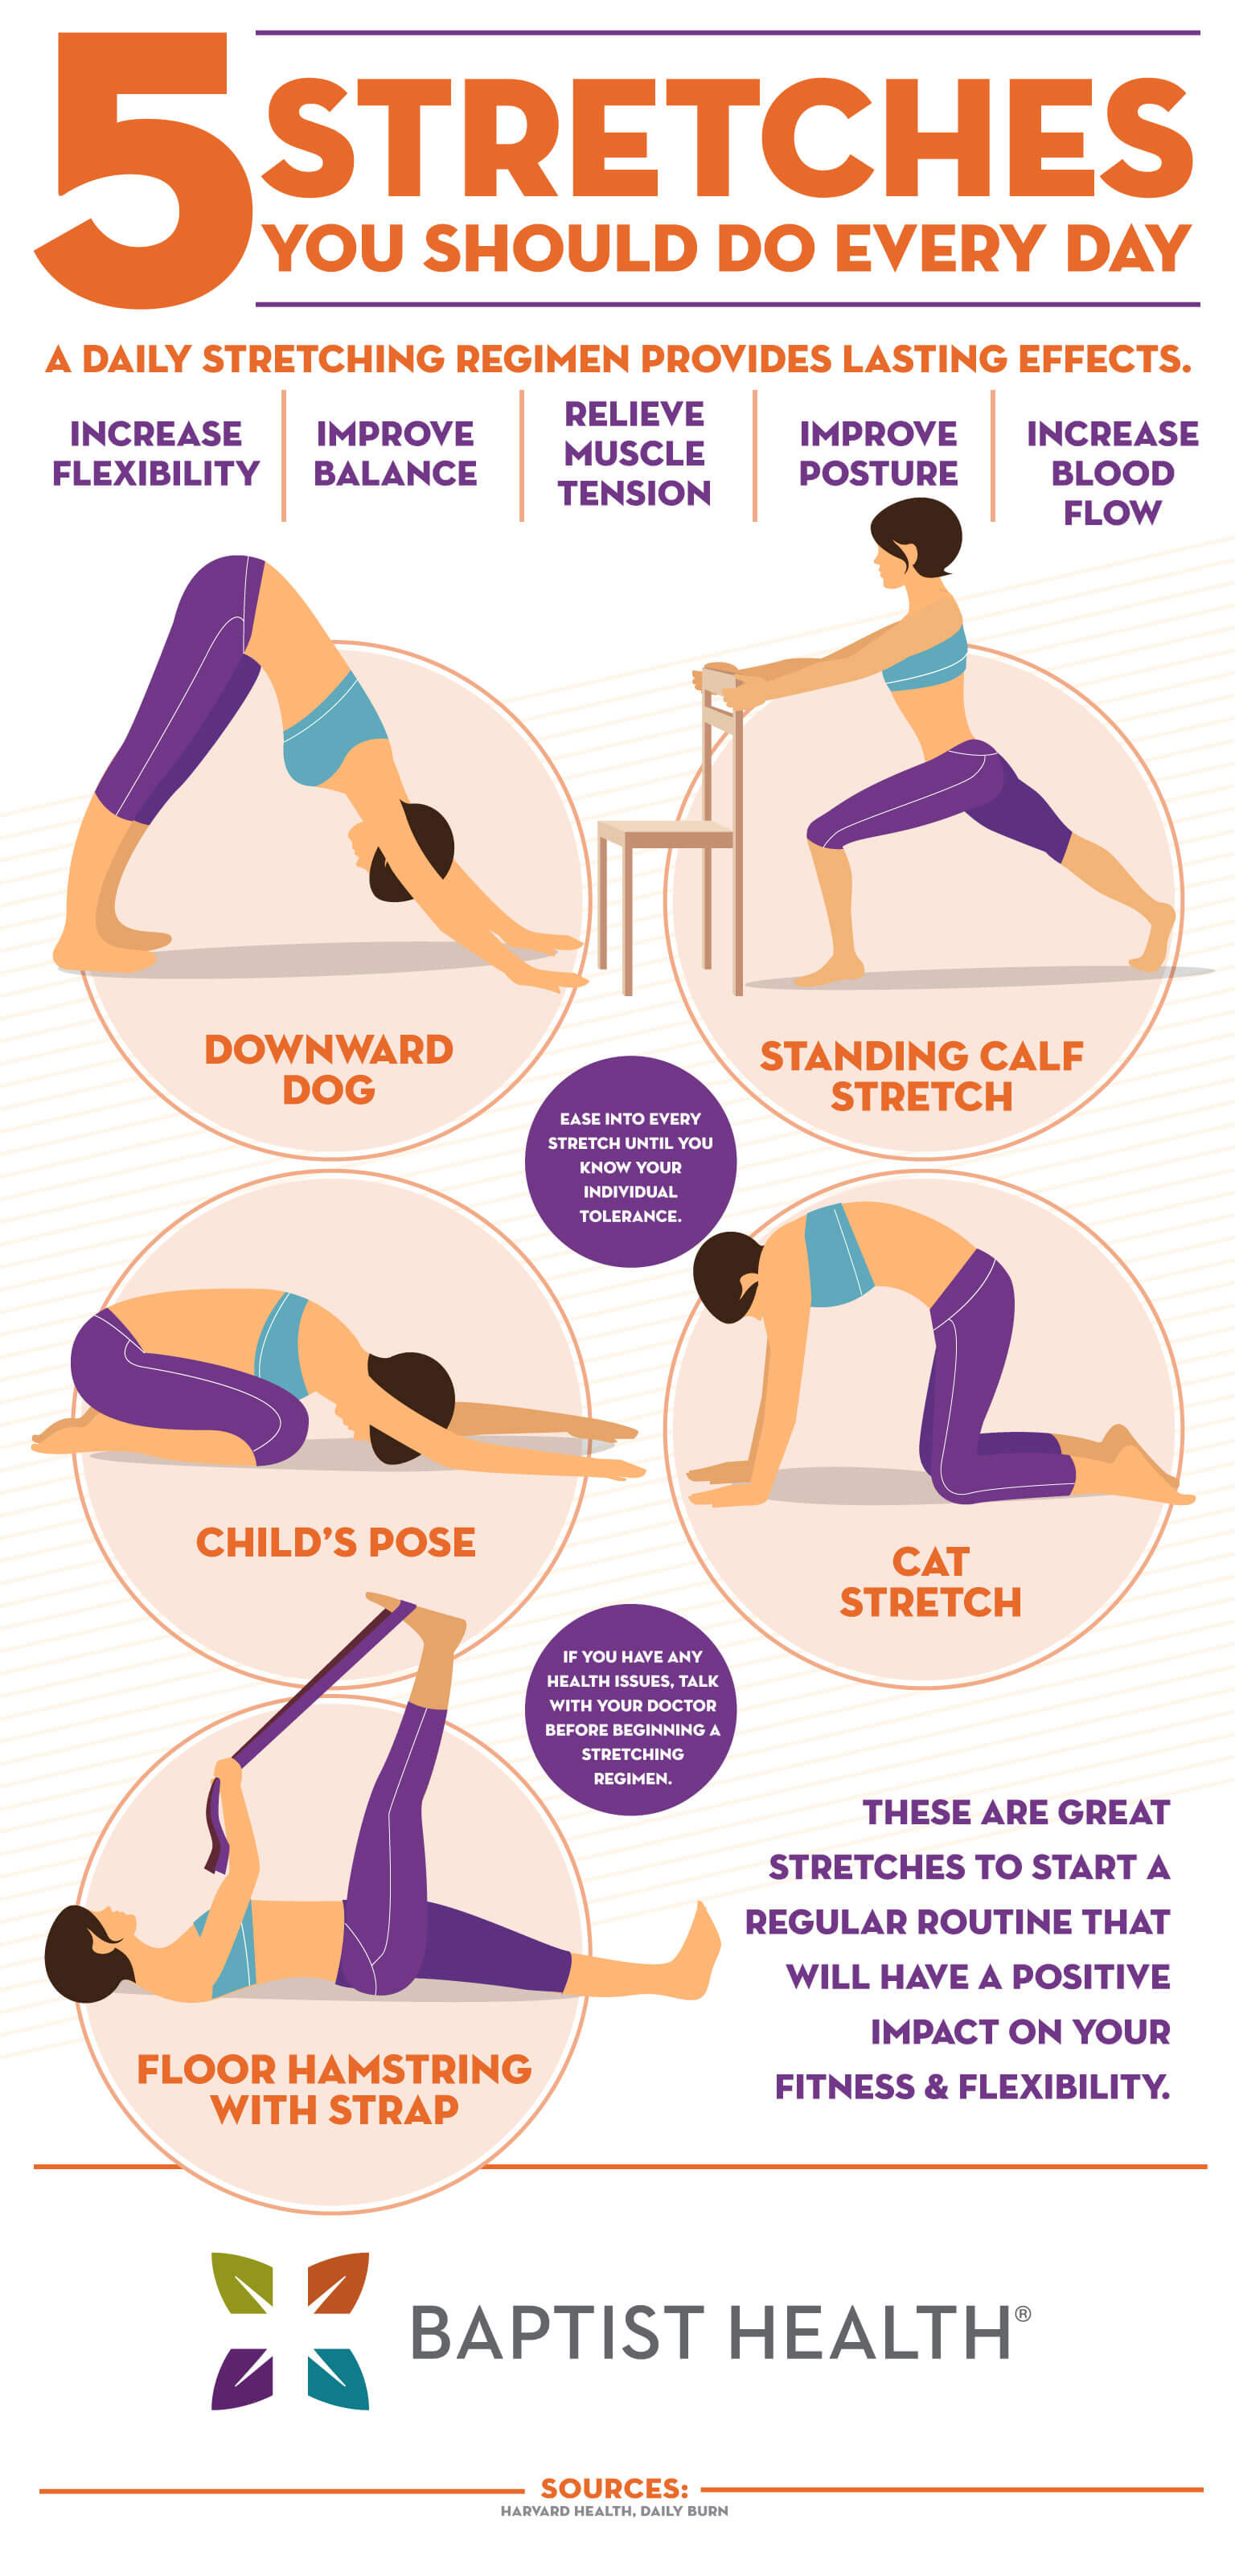 5 Stretches You Should Do Every Day - Baptist Health